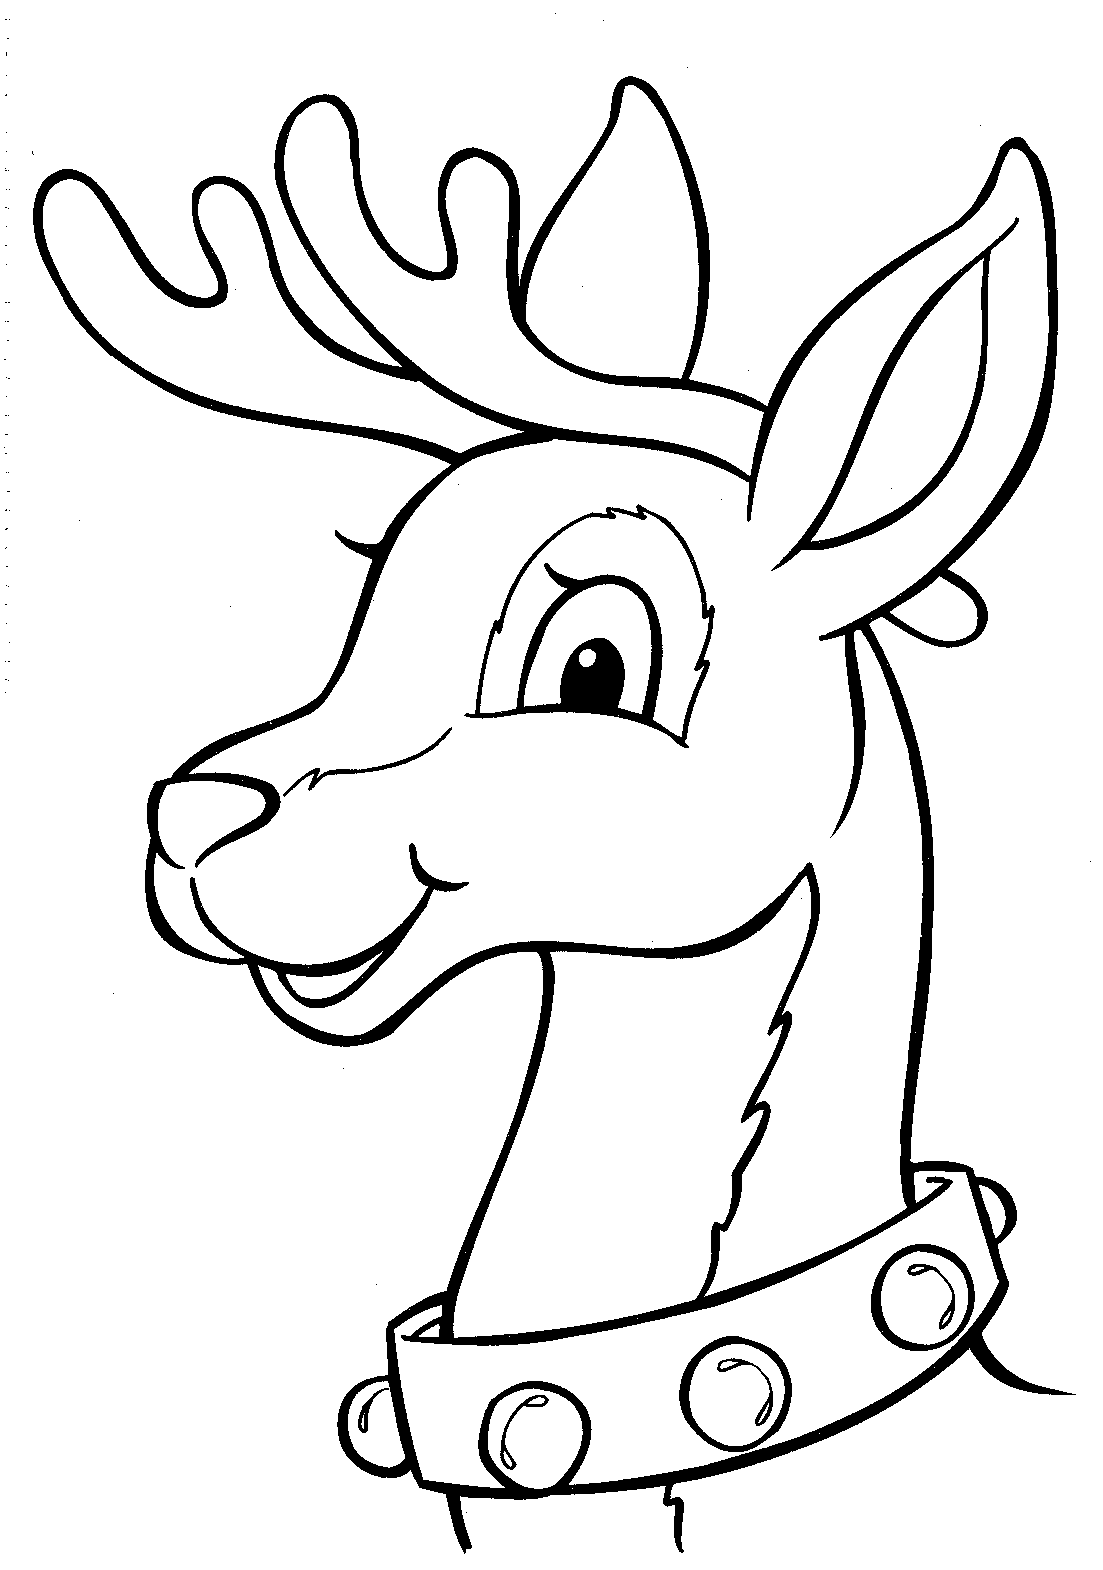 christmas coloring sheets free 2015 coloring pages for christmas wallpapers images coloring sheets christmas free 